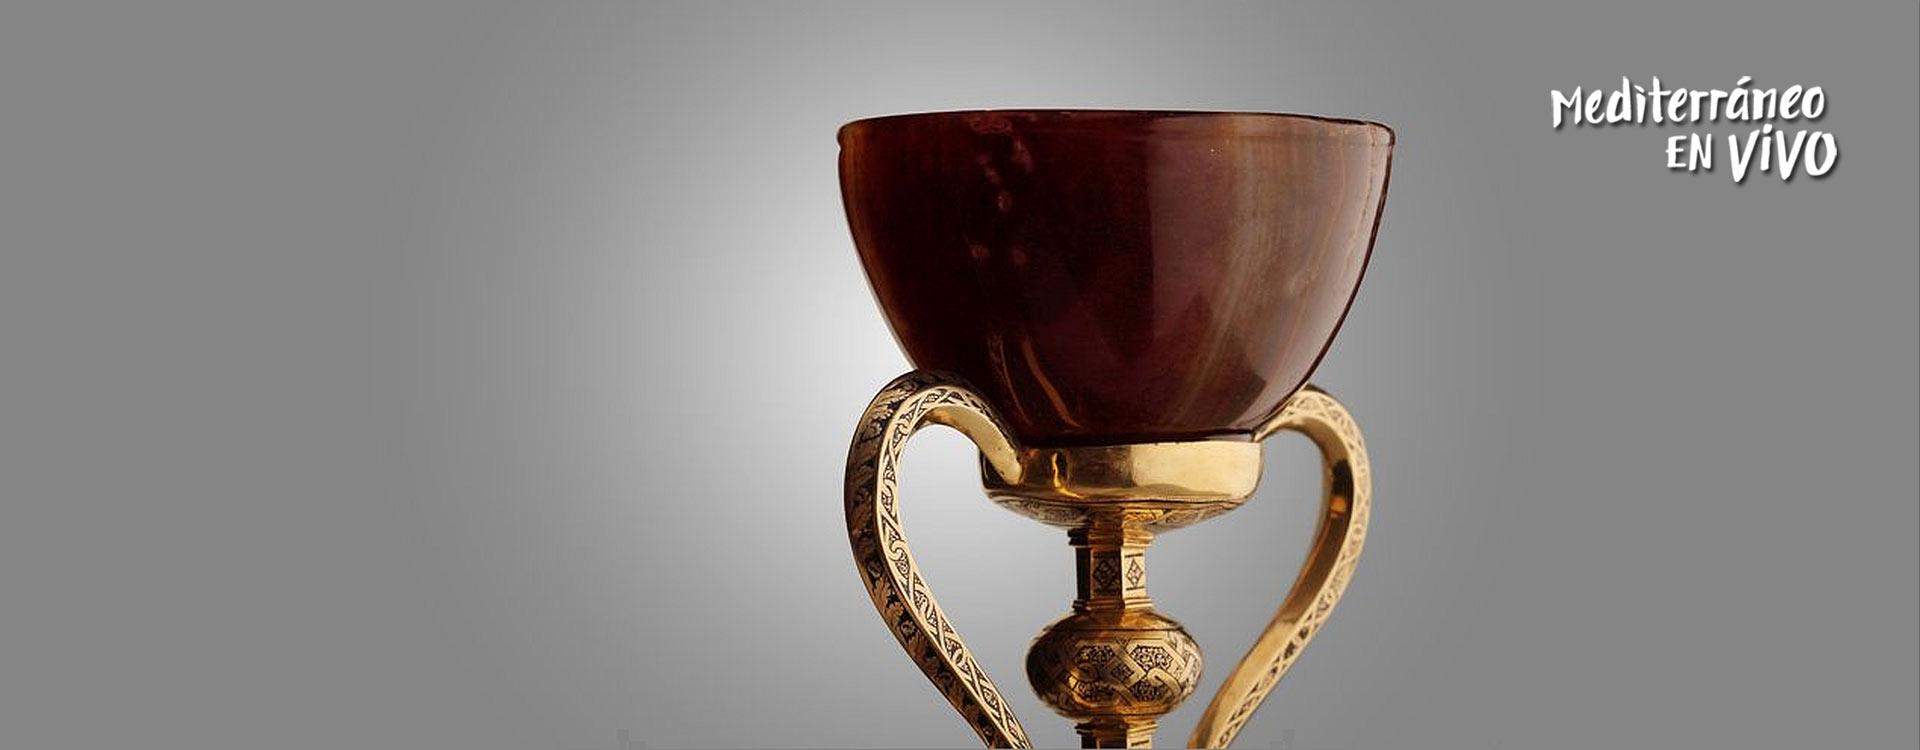 Image of the Holy Chalice in Valencia Cathedral